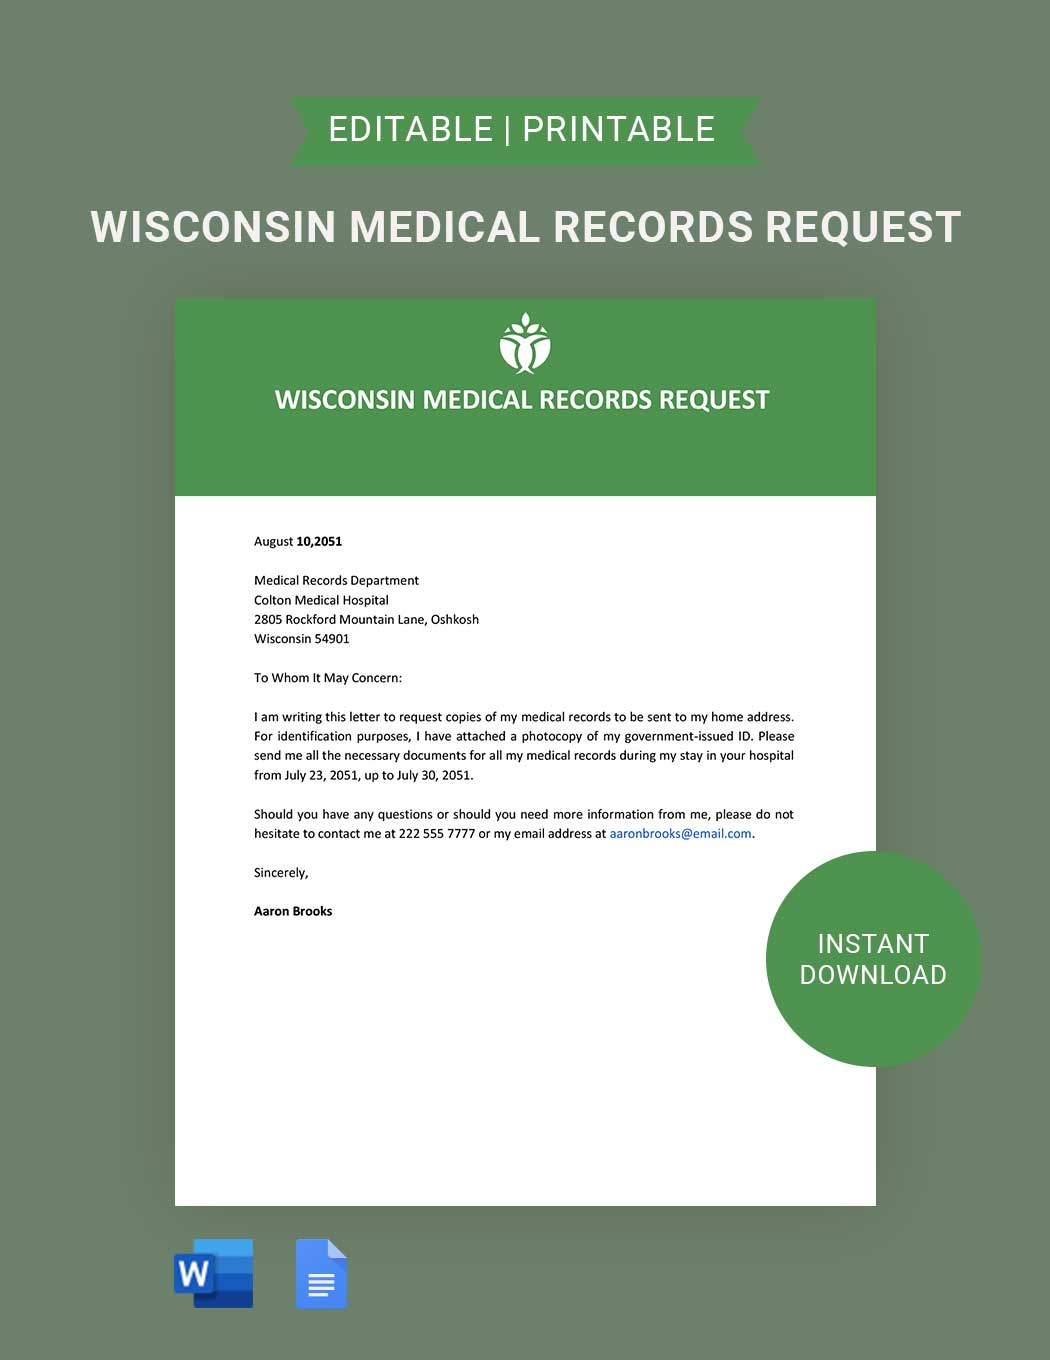 Wisconsin Medical Records Request Template in Word, Google Docs